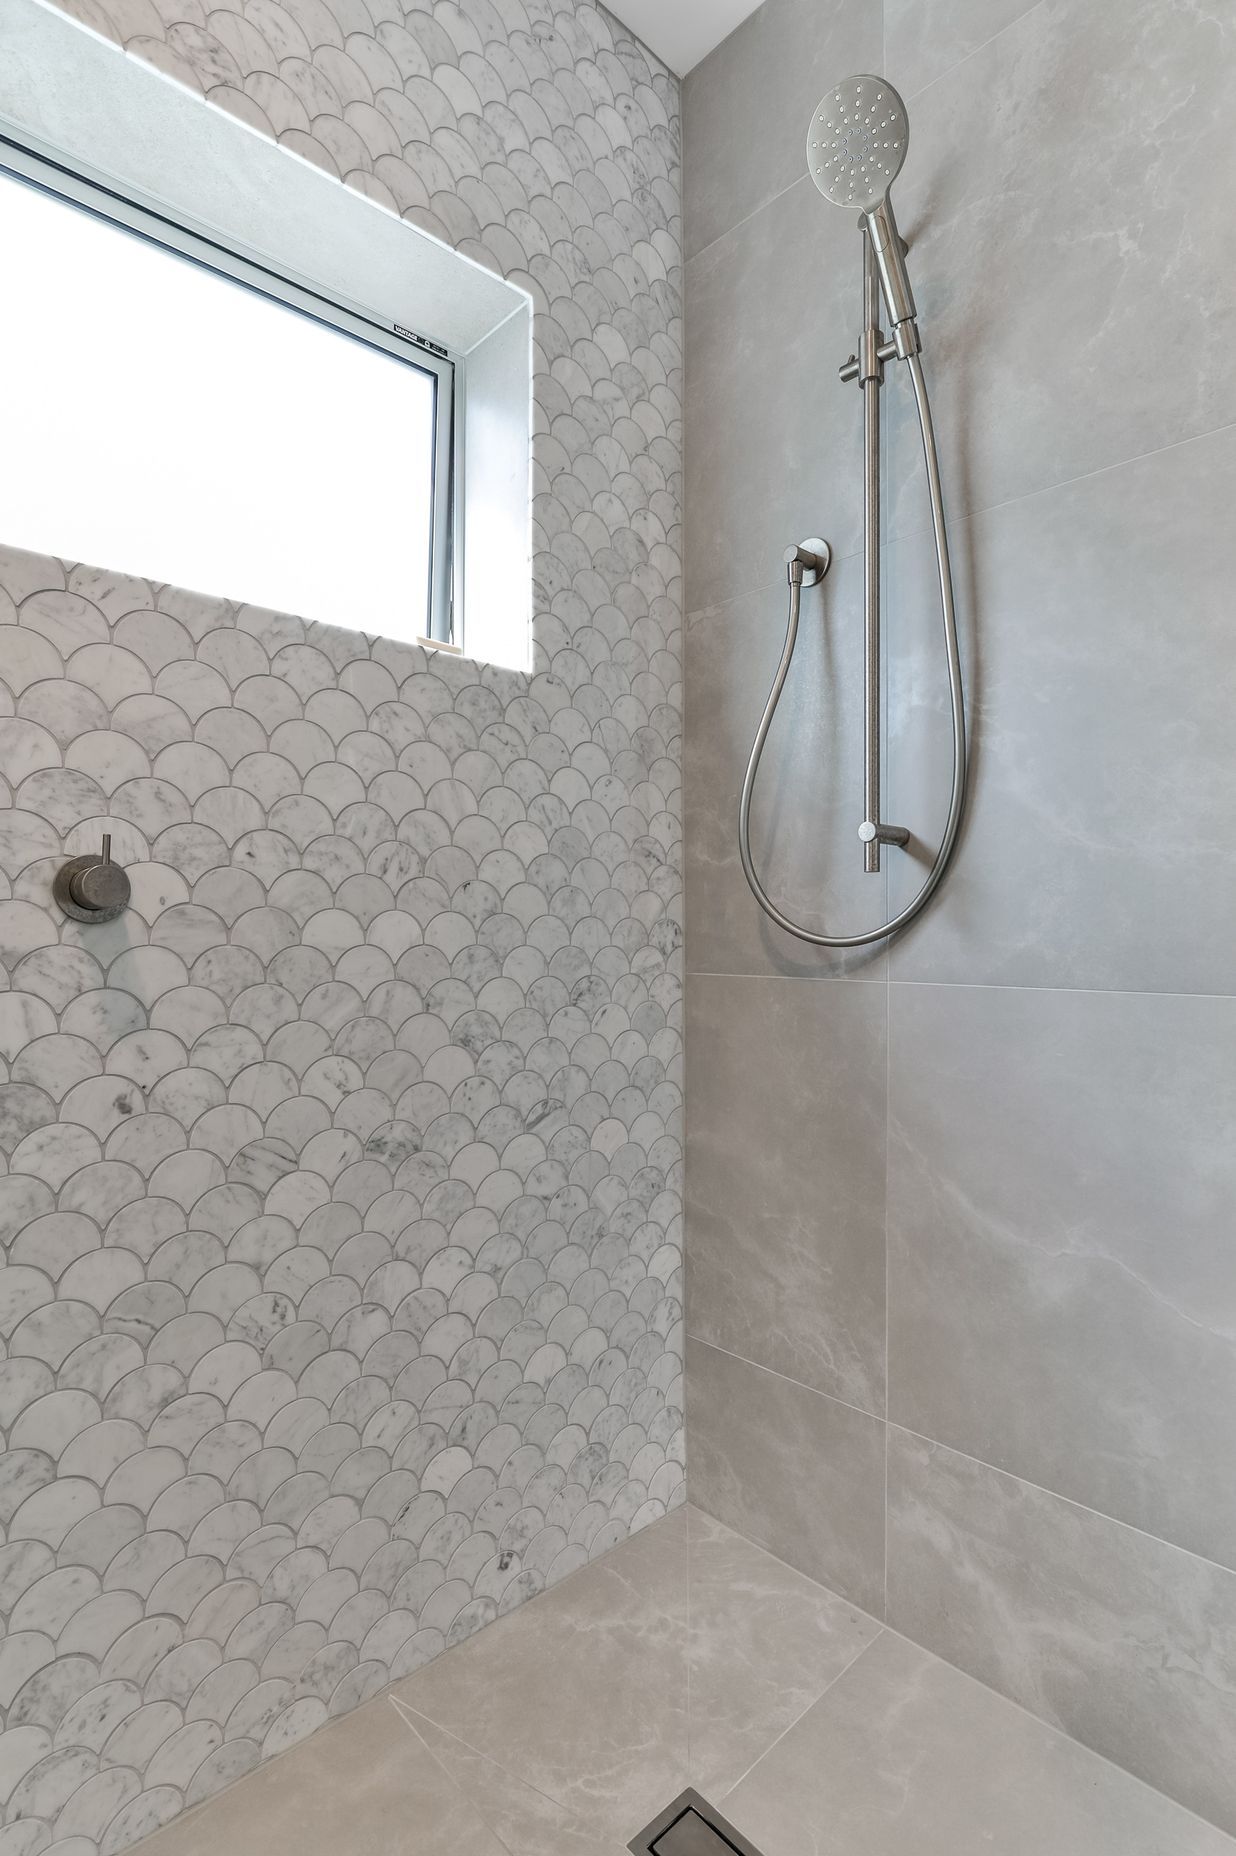 Tiles used: Stardust Moon 597x597mm floor and wall,Fish Scale Carrara Honed Mosaic 245x265mm